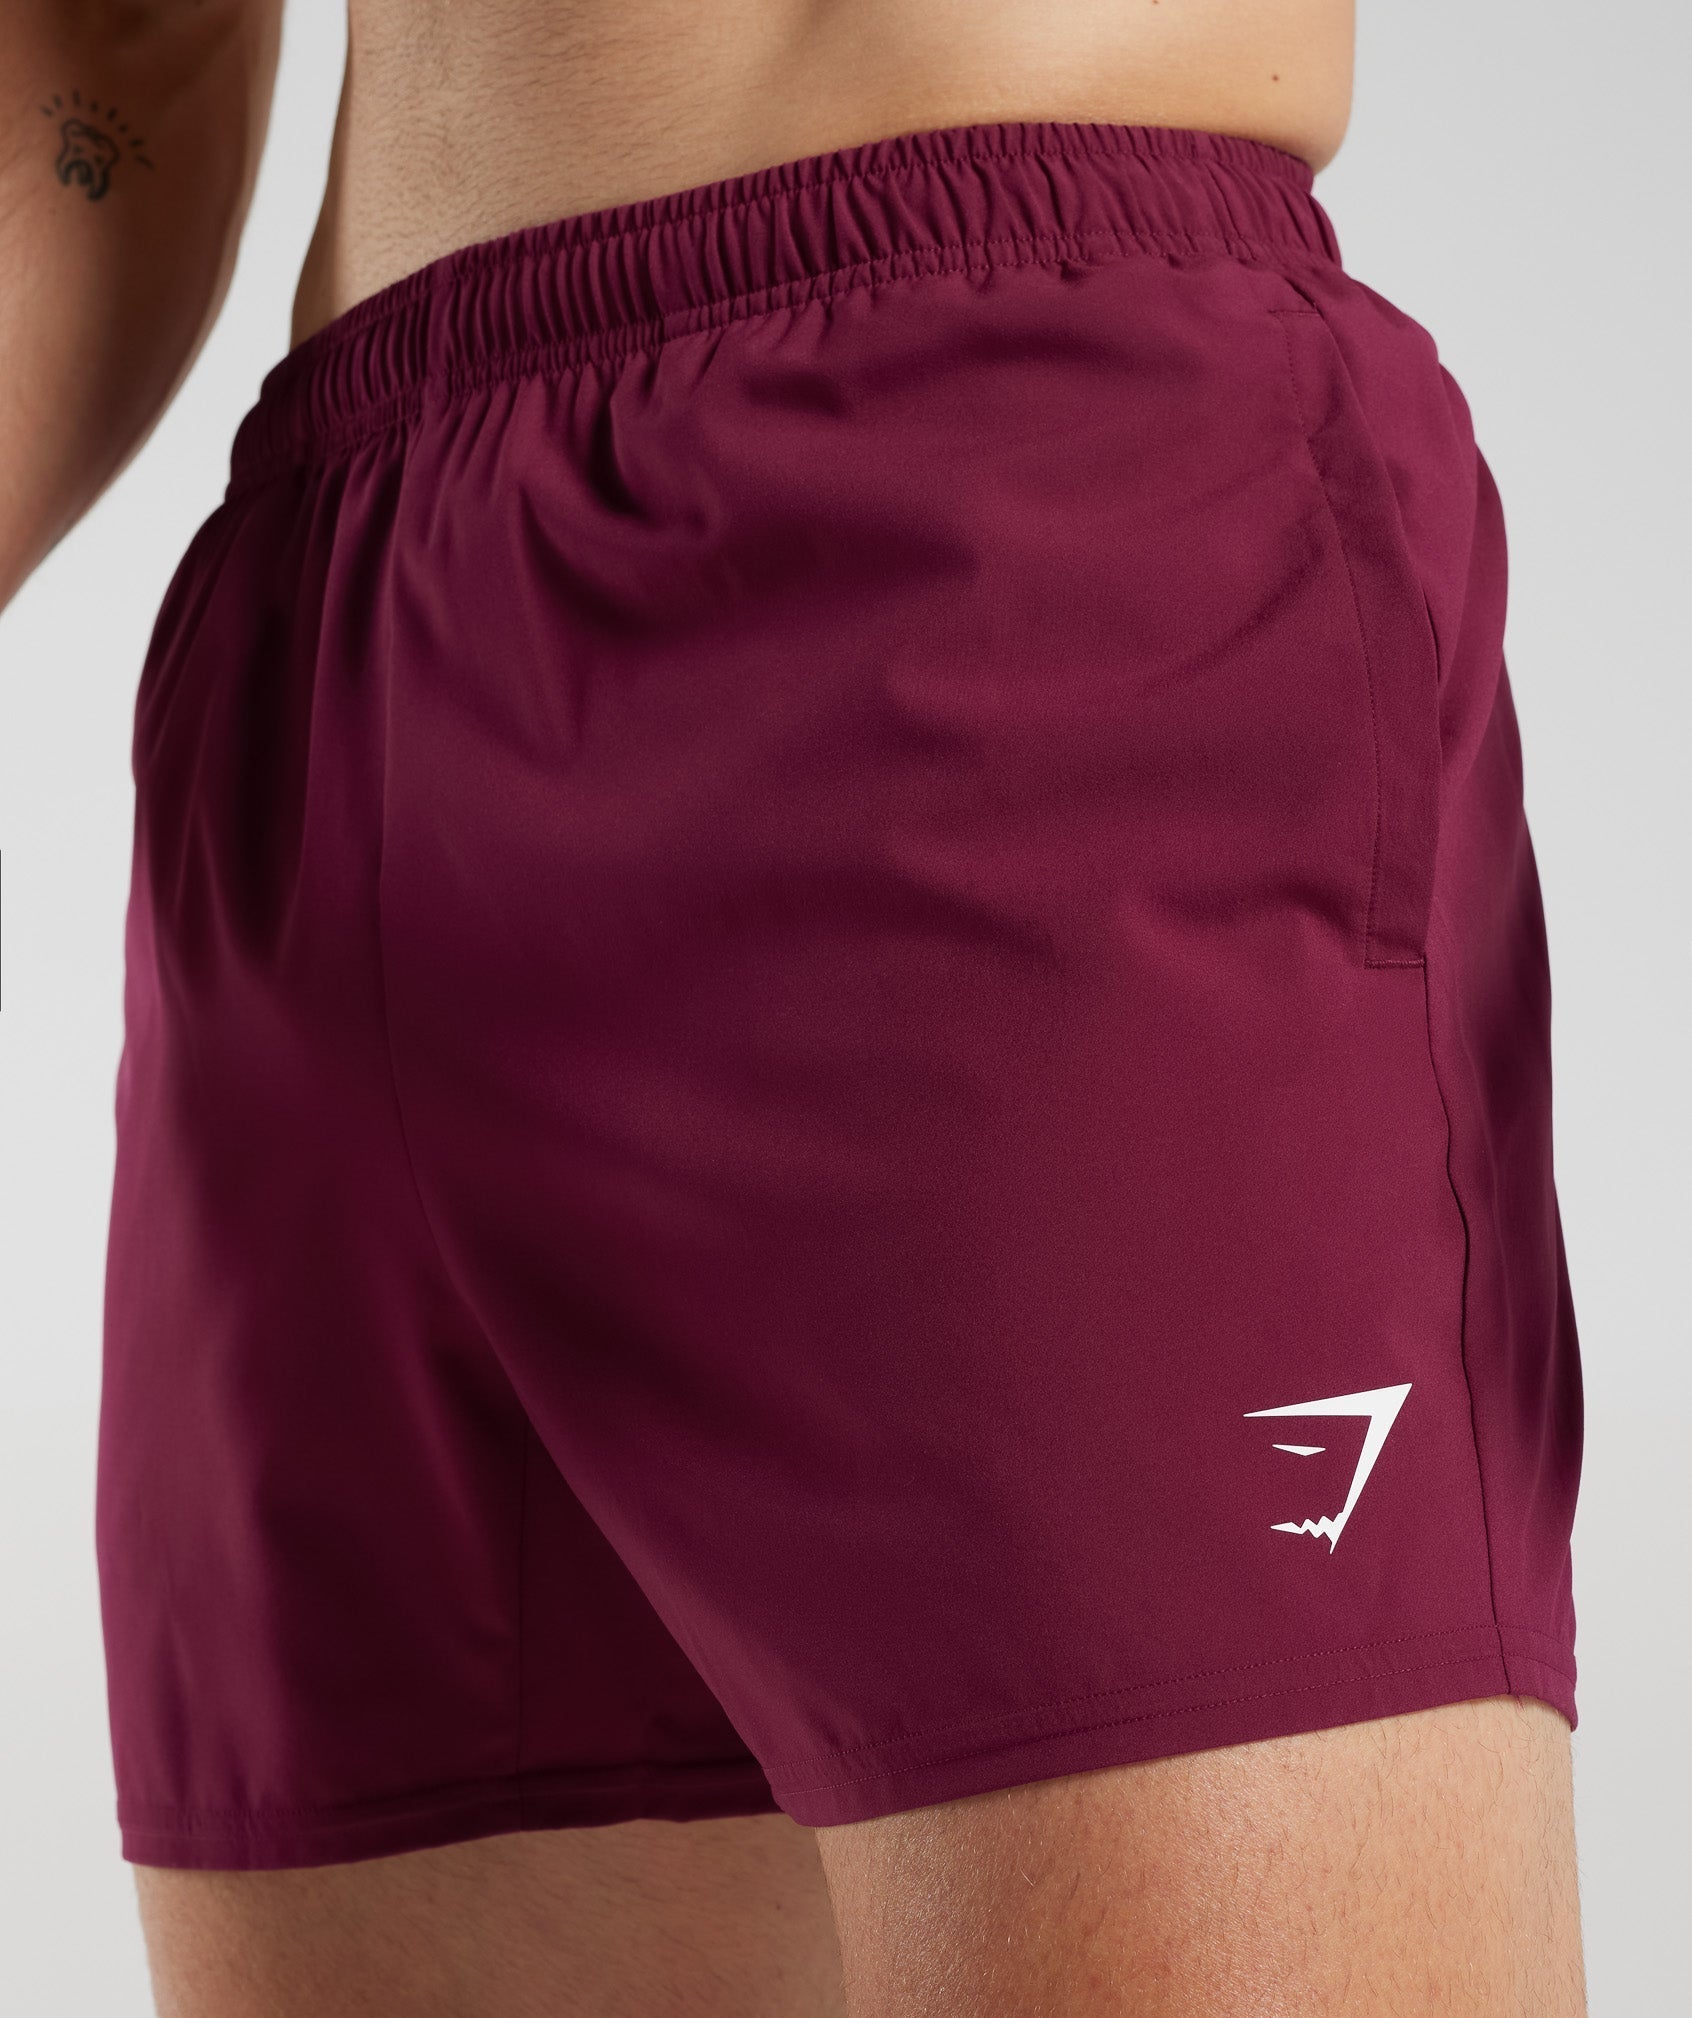 Arrival 5" Shorts in Plum Pink - view 4